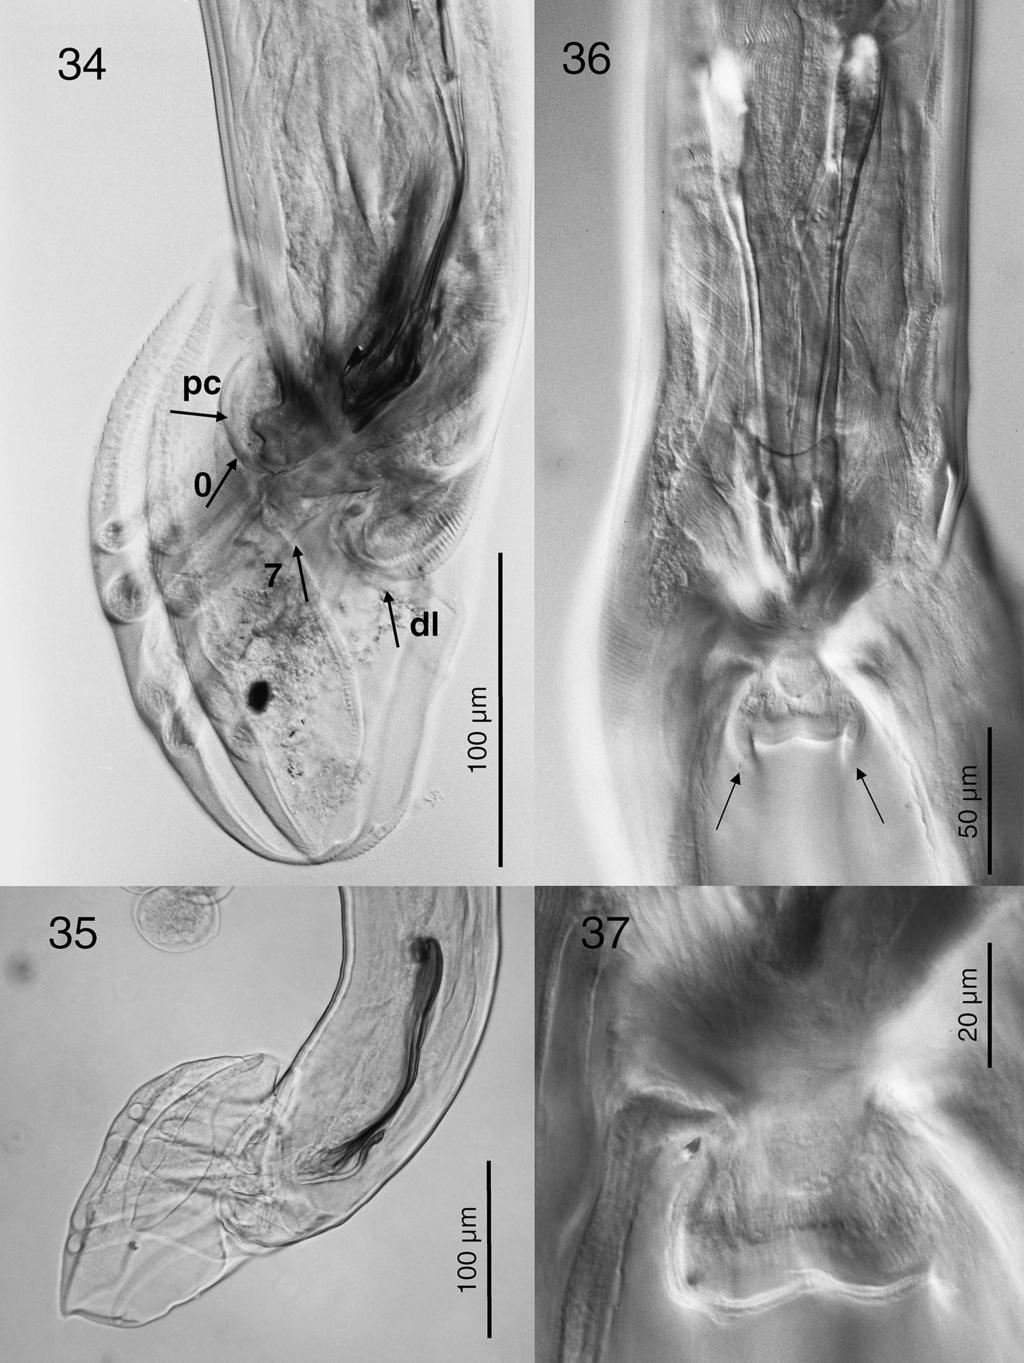 242 THE JOURNAL OF PARASITOLOGY, VOL. 94, NO. 1, FEBRUARY 2008 FIGURES 34 37. Africanastrongylus buceros gen. nov. et sp. nov., showing male bursal attributes based on photomicrographs of paratypes.